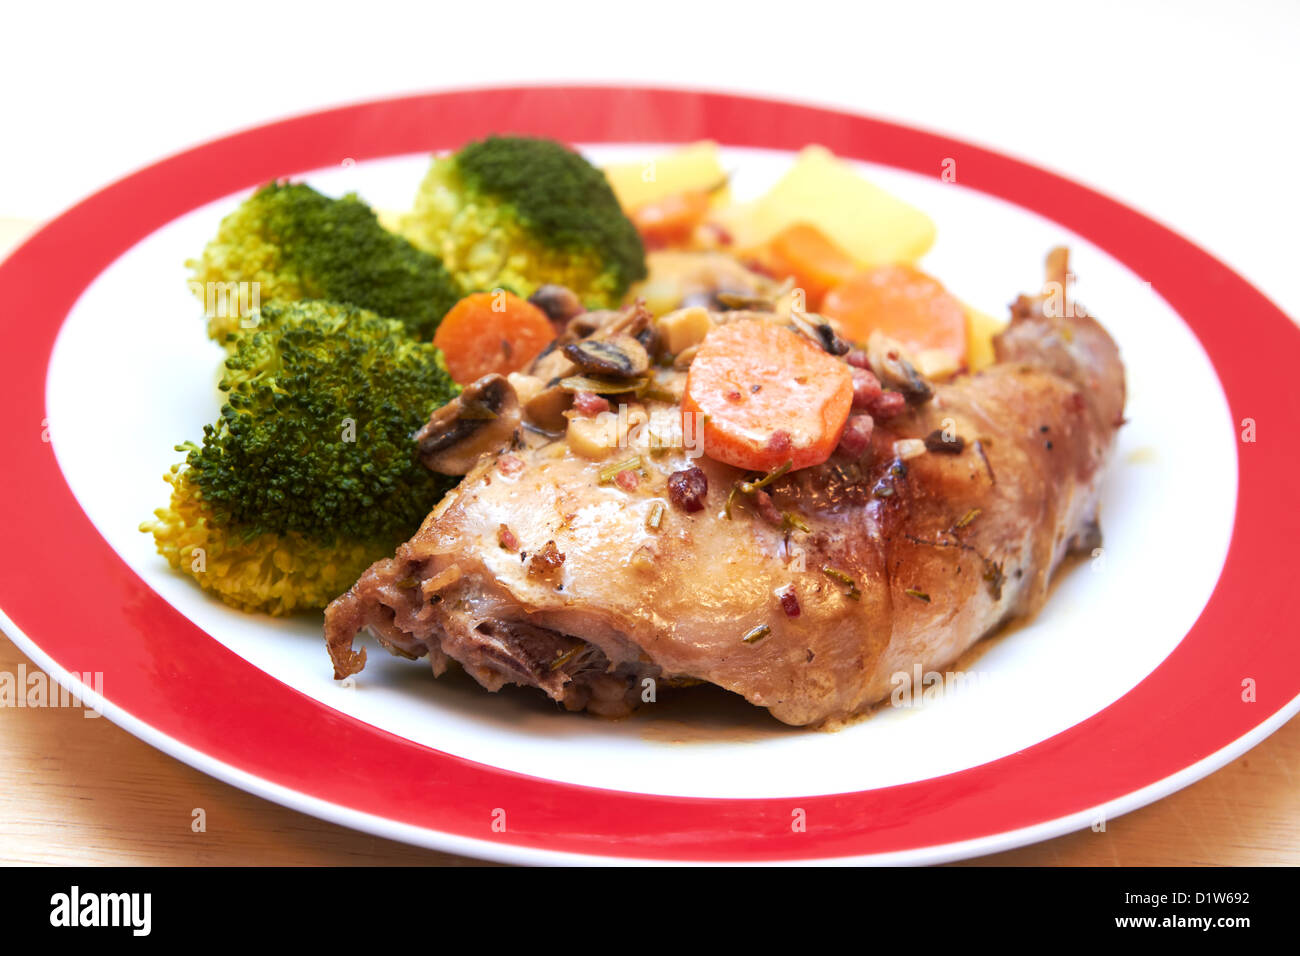 Braised rabbit with potatoes and broccoli on a plate Stock Photo